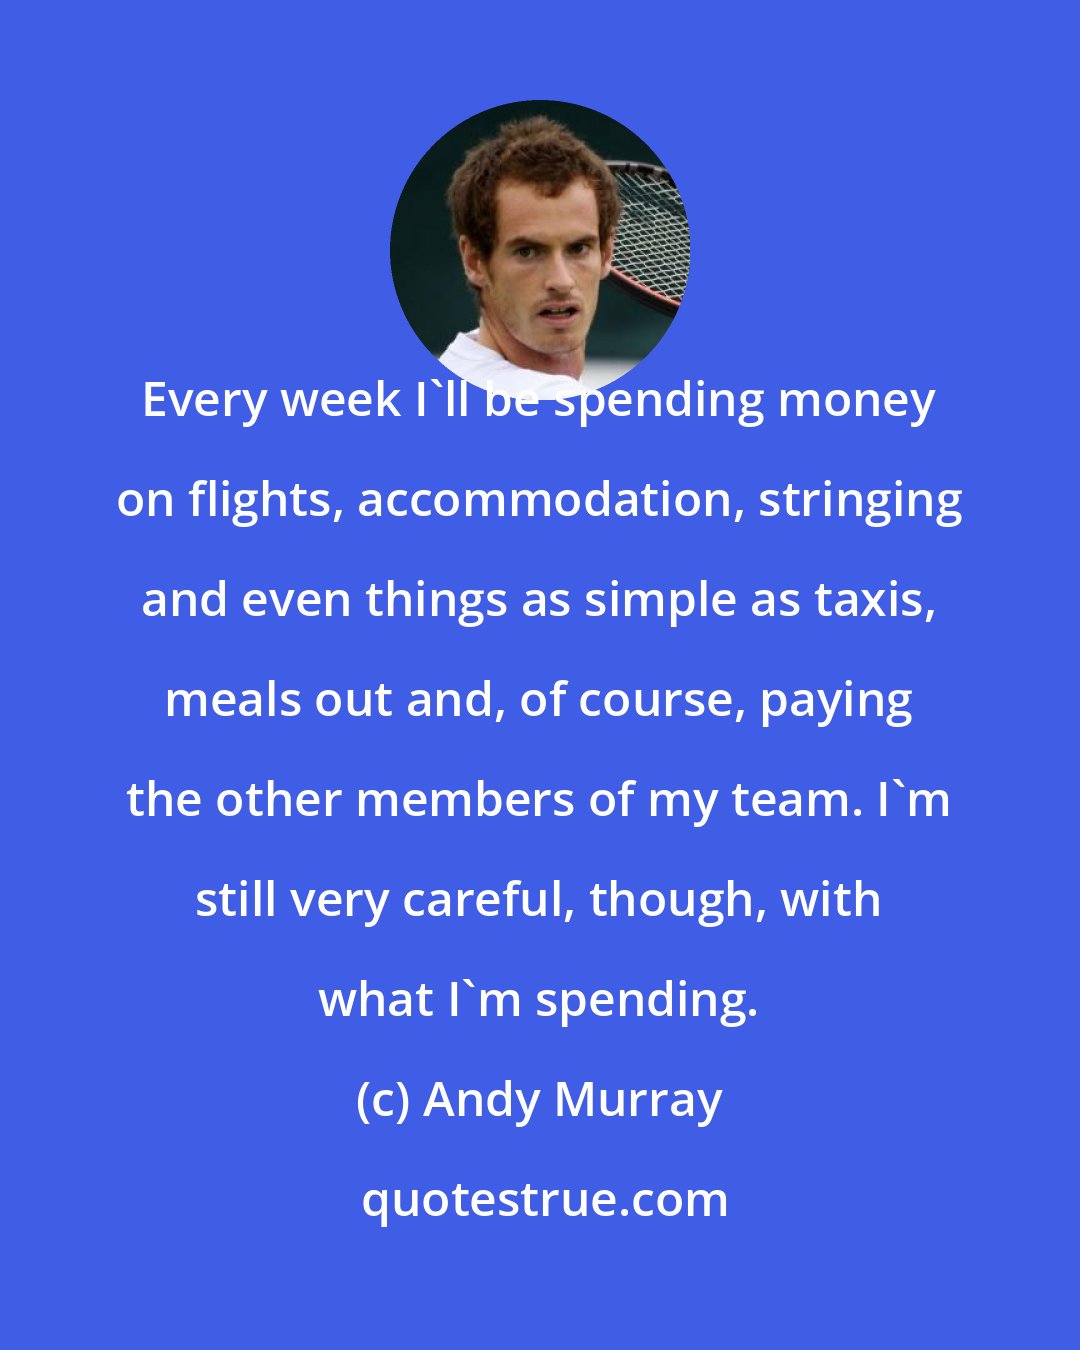 Andy Murray: Every week I'll be spending money on flights, accommodation, stringing and even things as simple as taxis, meals out and, of course, paying the other members of my team. I'm still very careful, though, with what I'm spending.